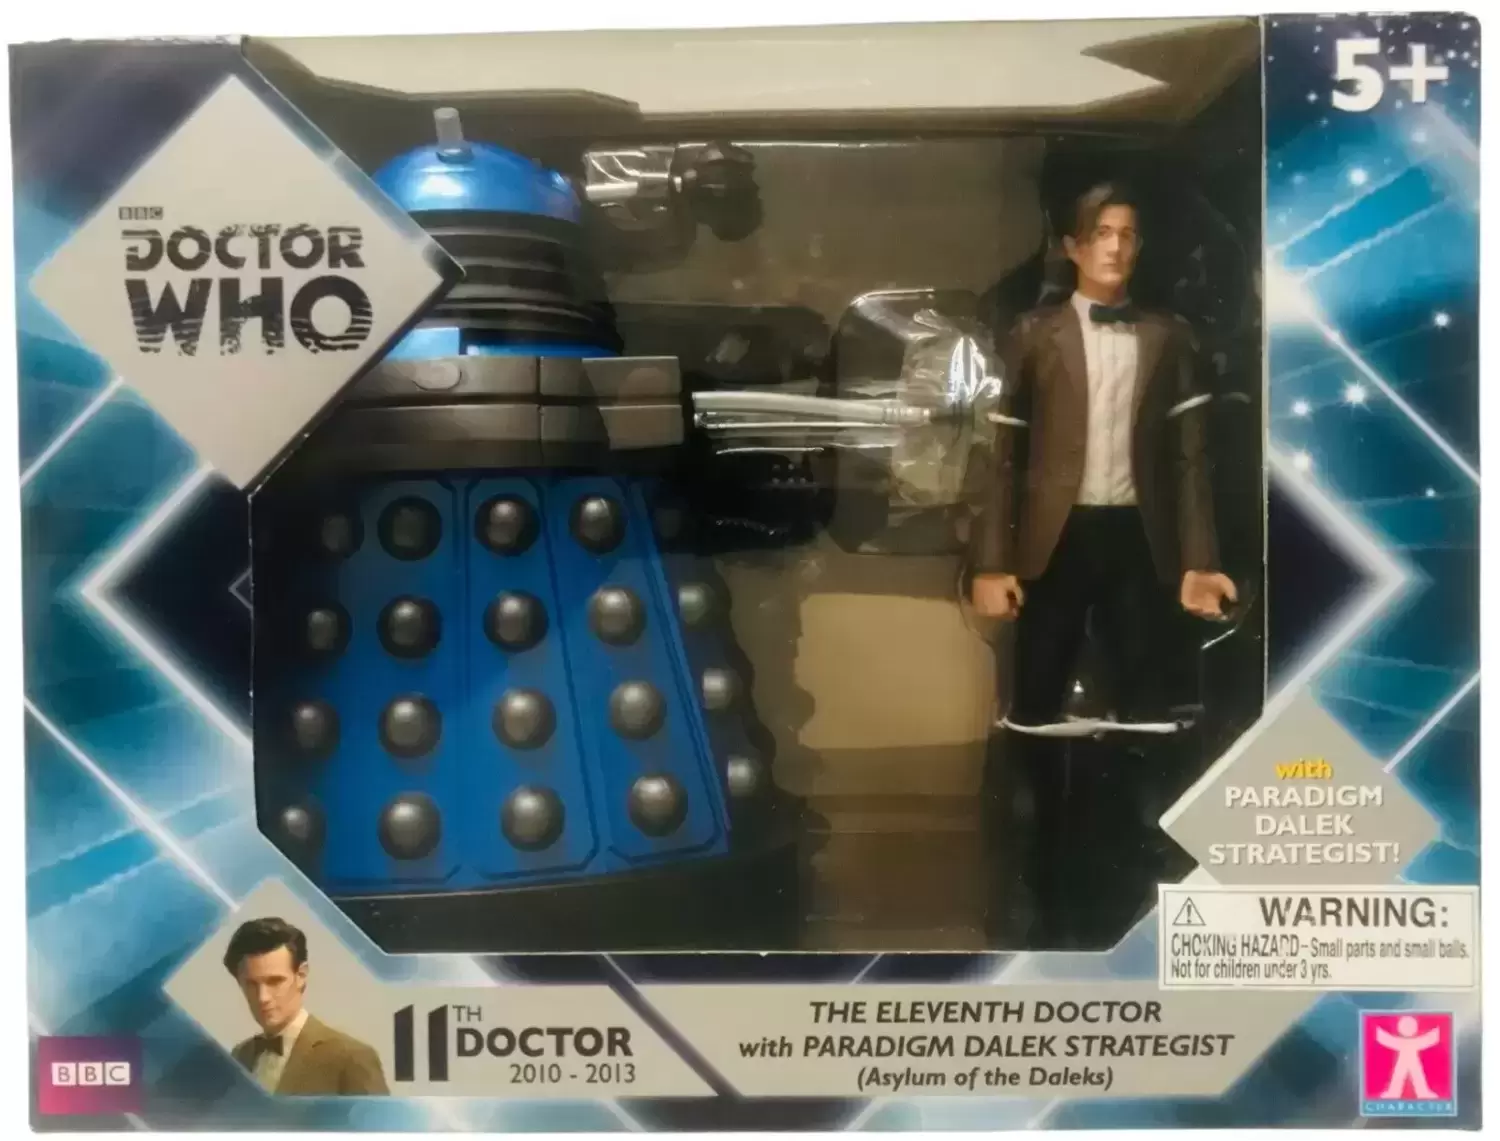 Action Figures - 11th Doctor - Eleventh Doctor with Paradigm Dalek Strategist